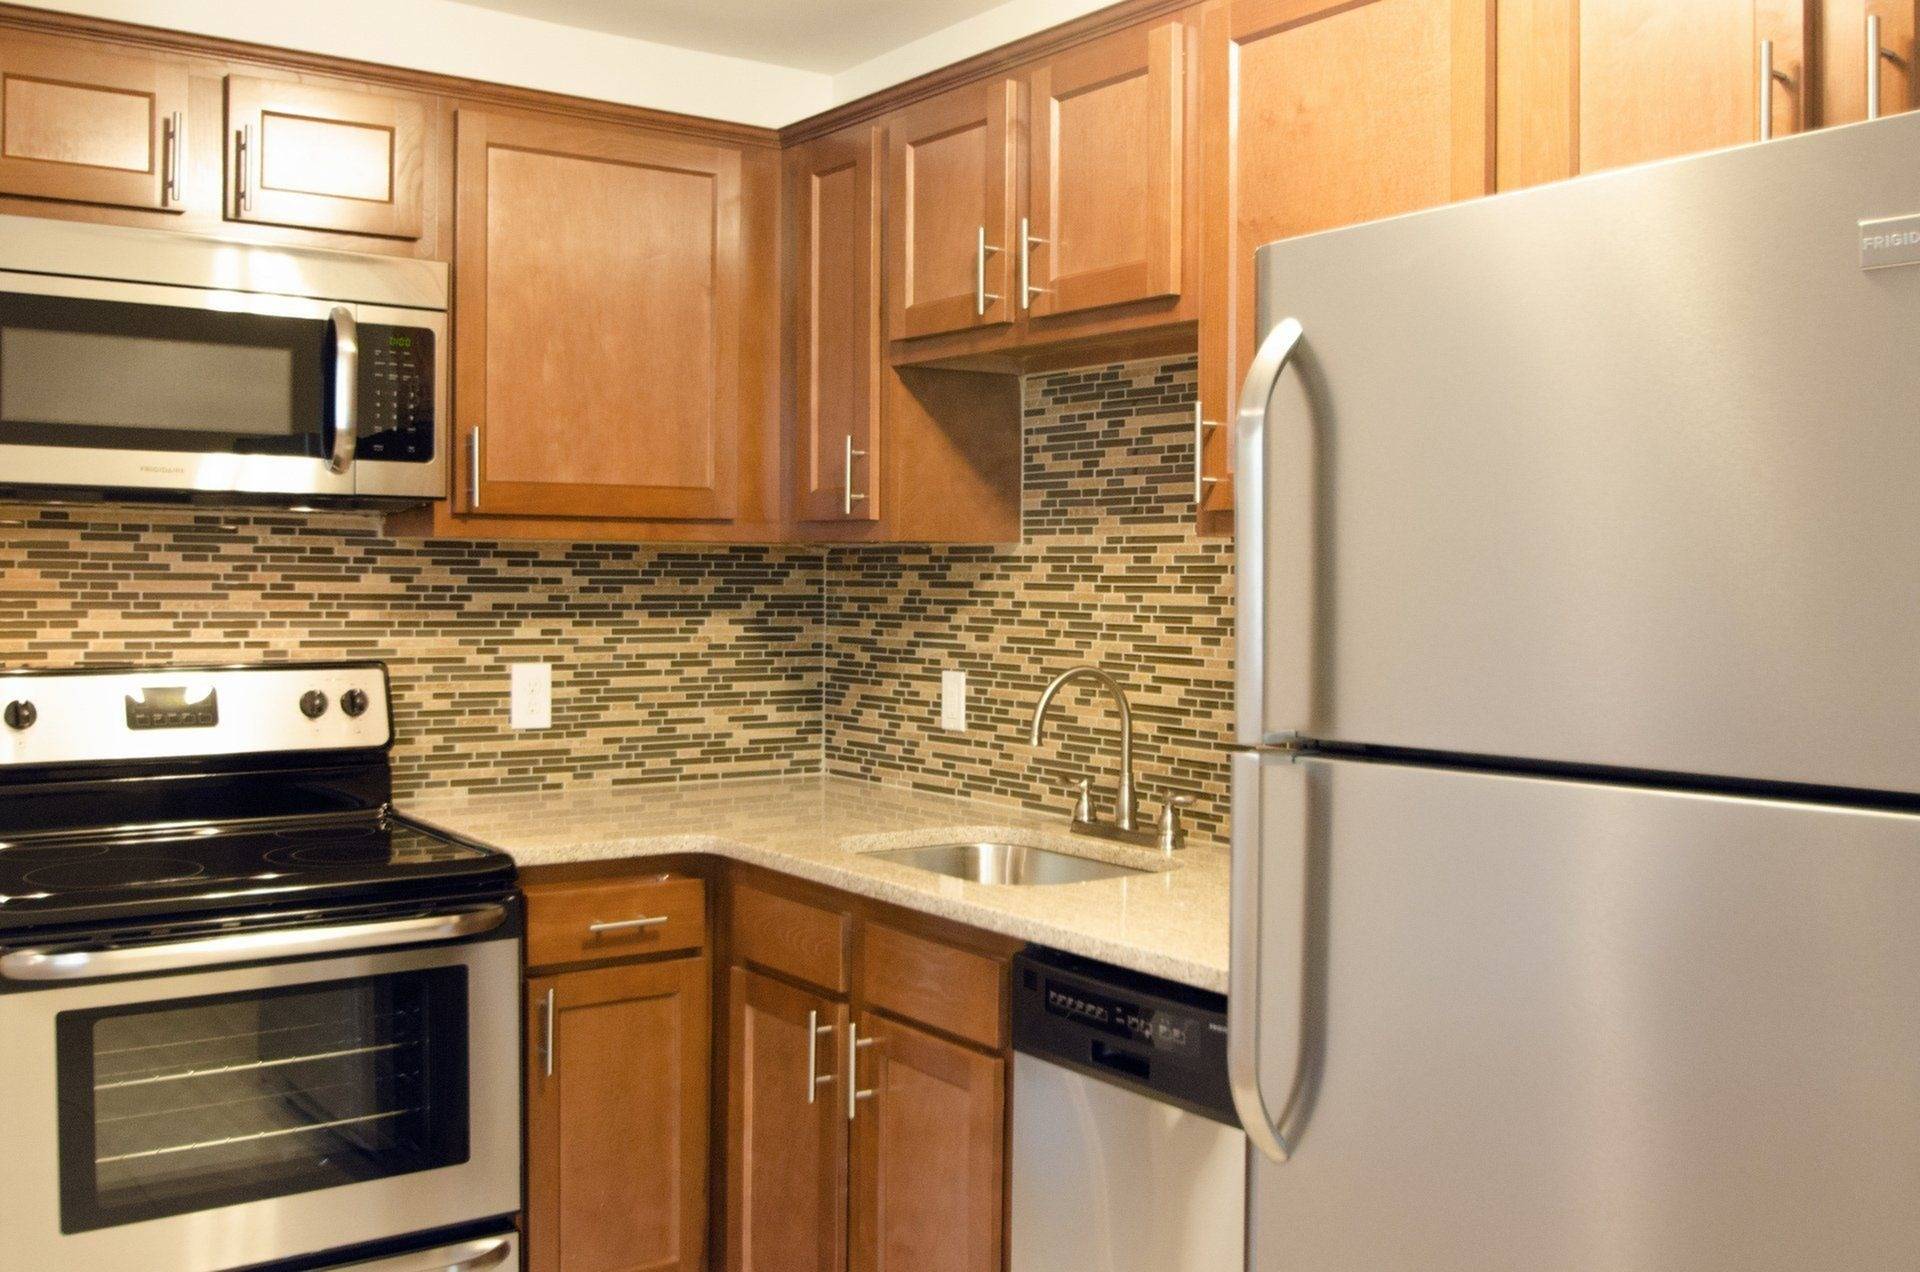 Apartments in West Chester, PA - Audubon Pointe - Kitchen With Stainless Steel Appliances, Light Wood Cabinetry, Granite-Style Countertops, and Tile Backsplash